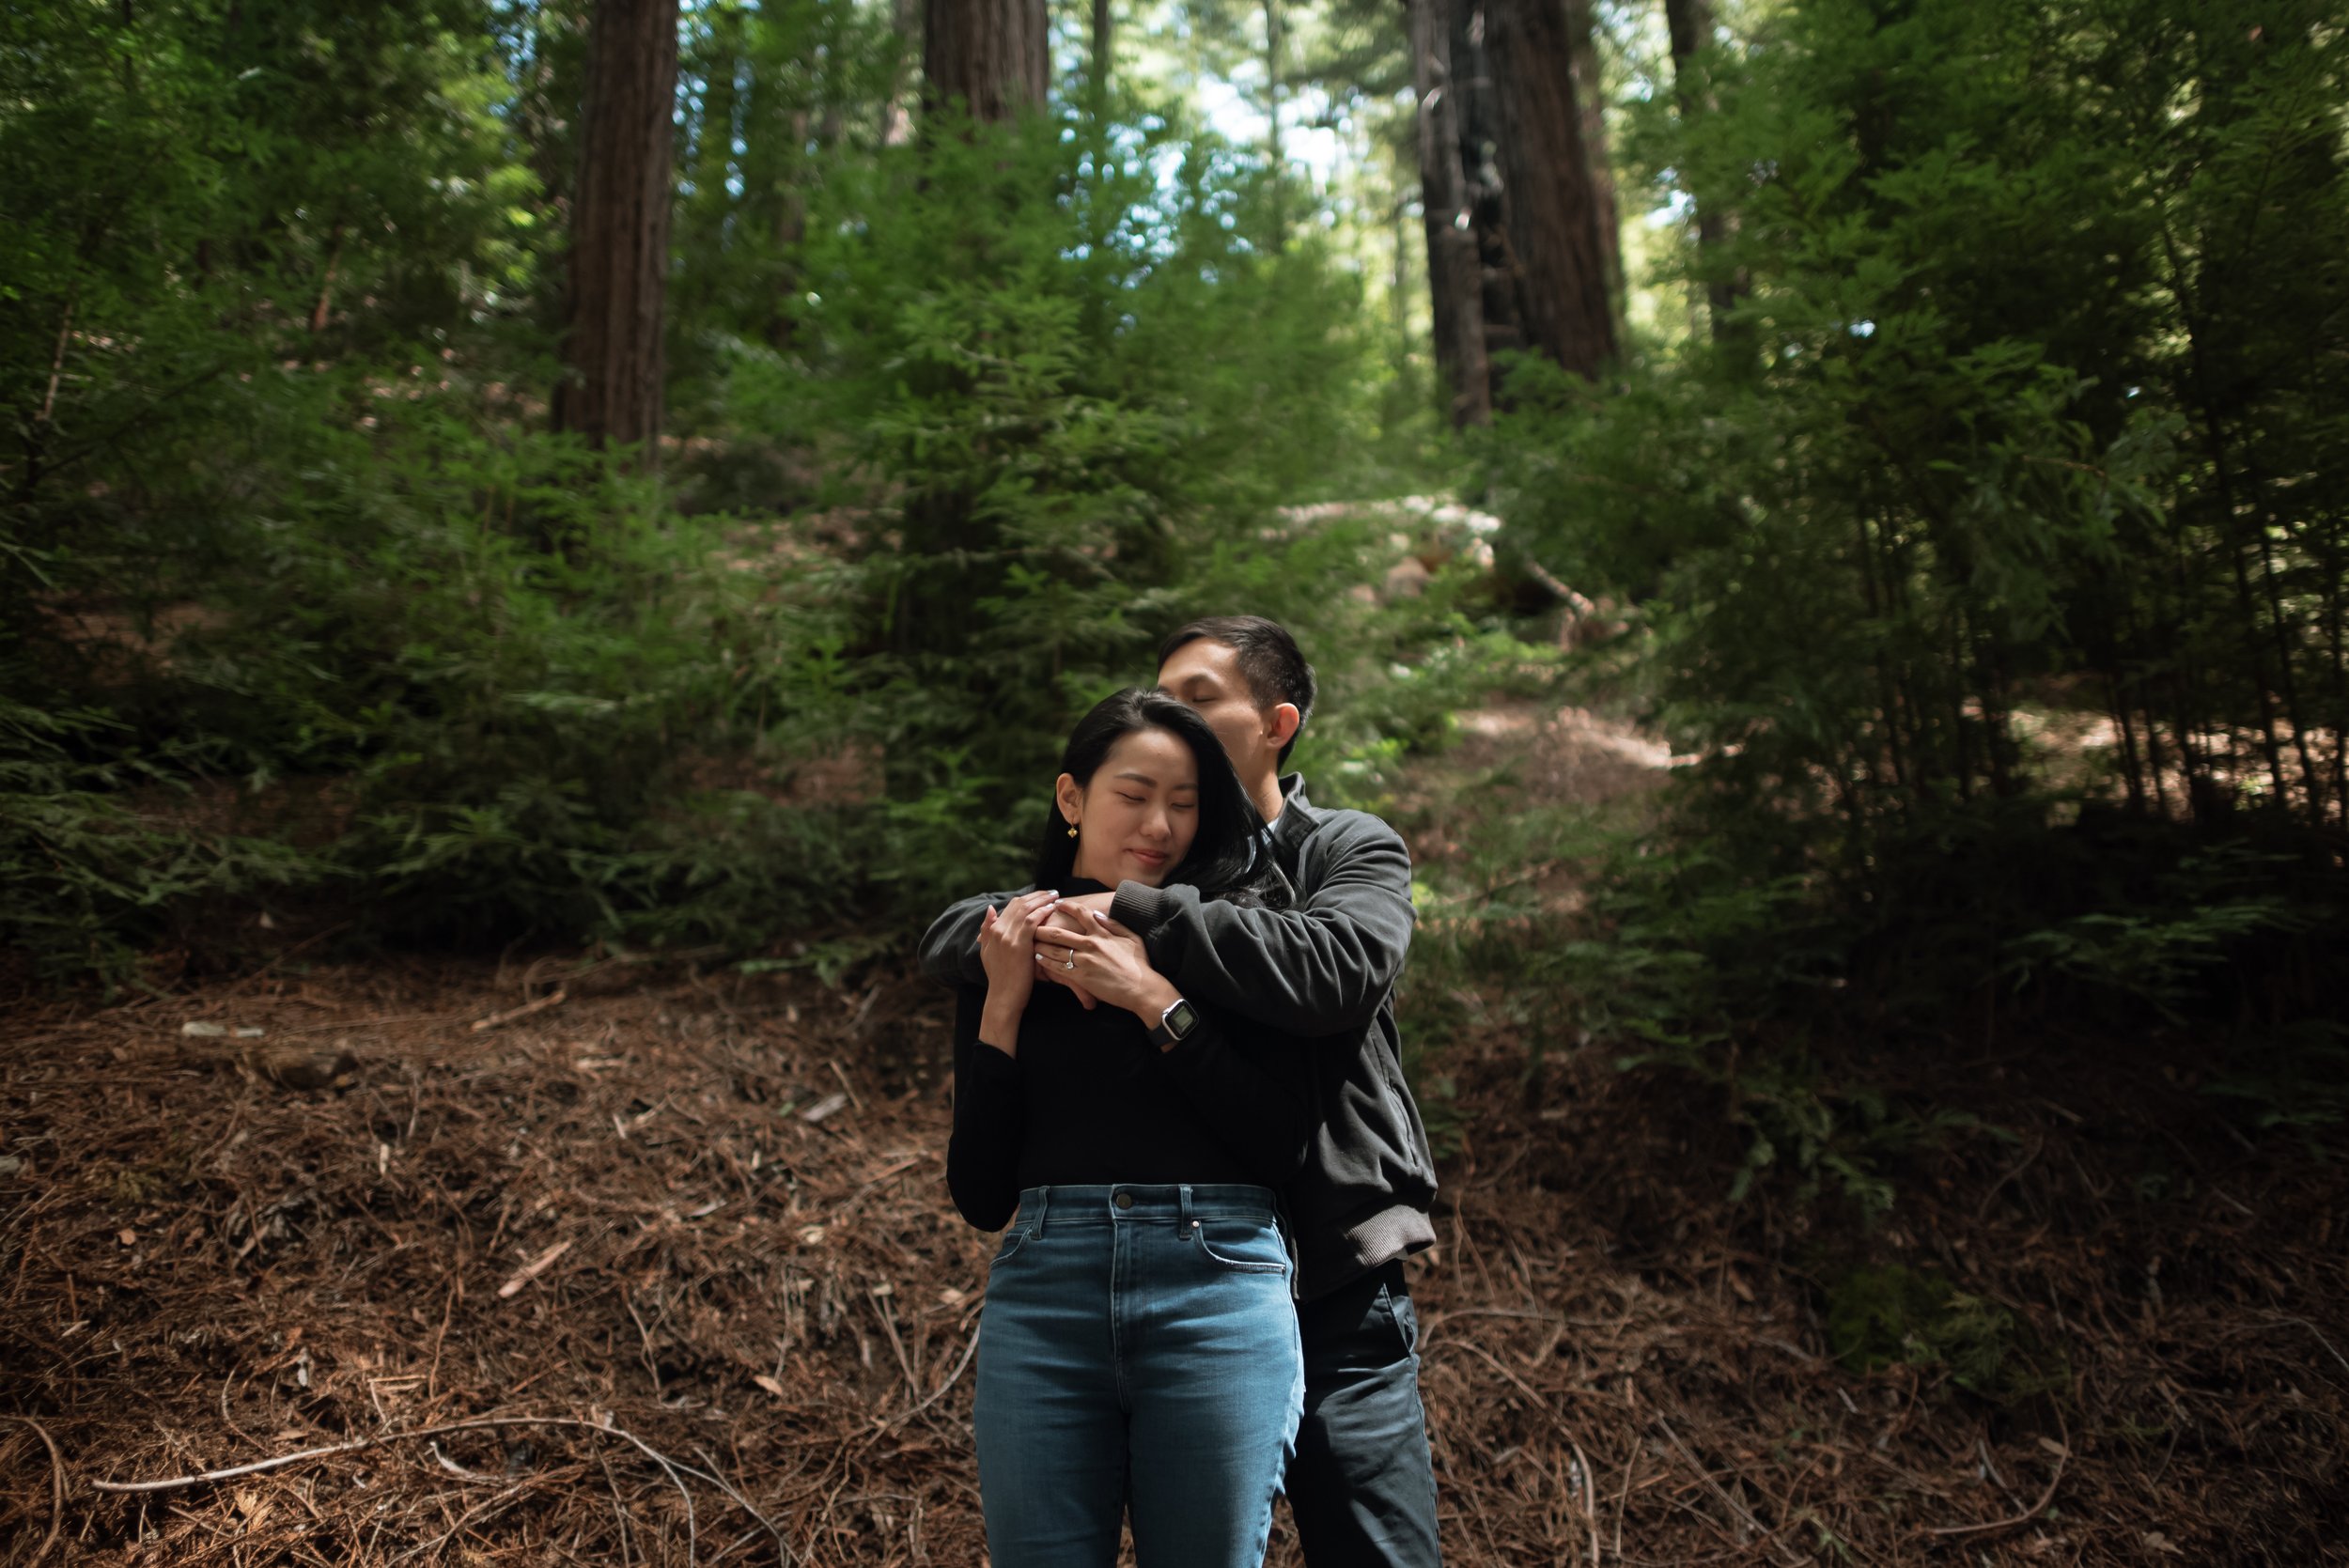 couples photos in the forests of california